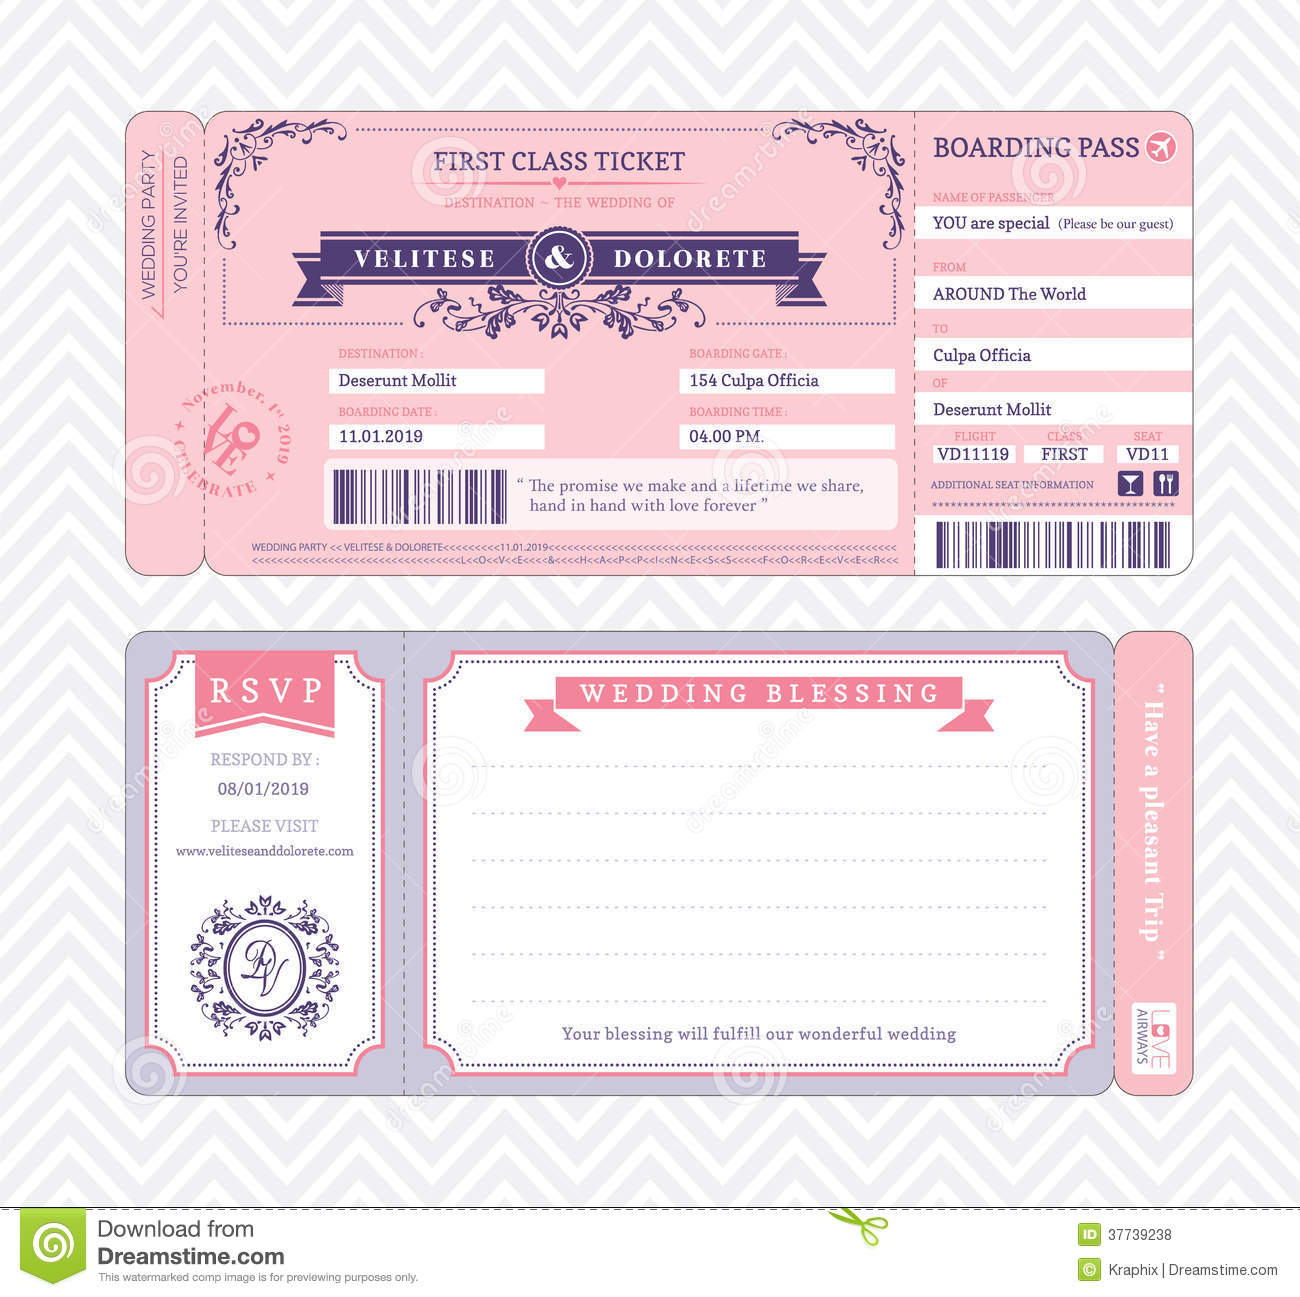 Boarding Pass Wedding Invitation Template Stock Vector intended for dimensions 1300 X 1297